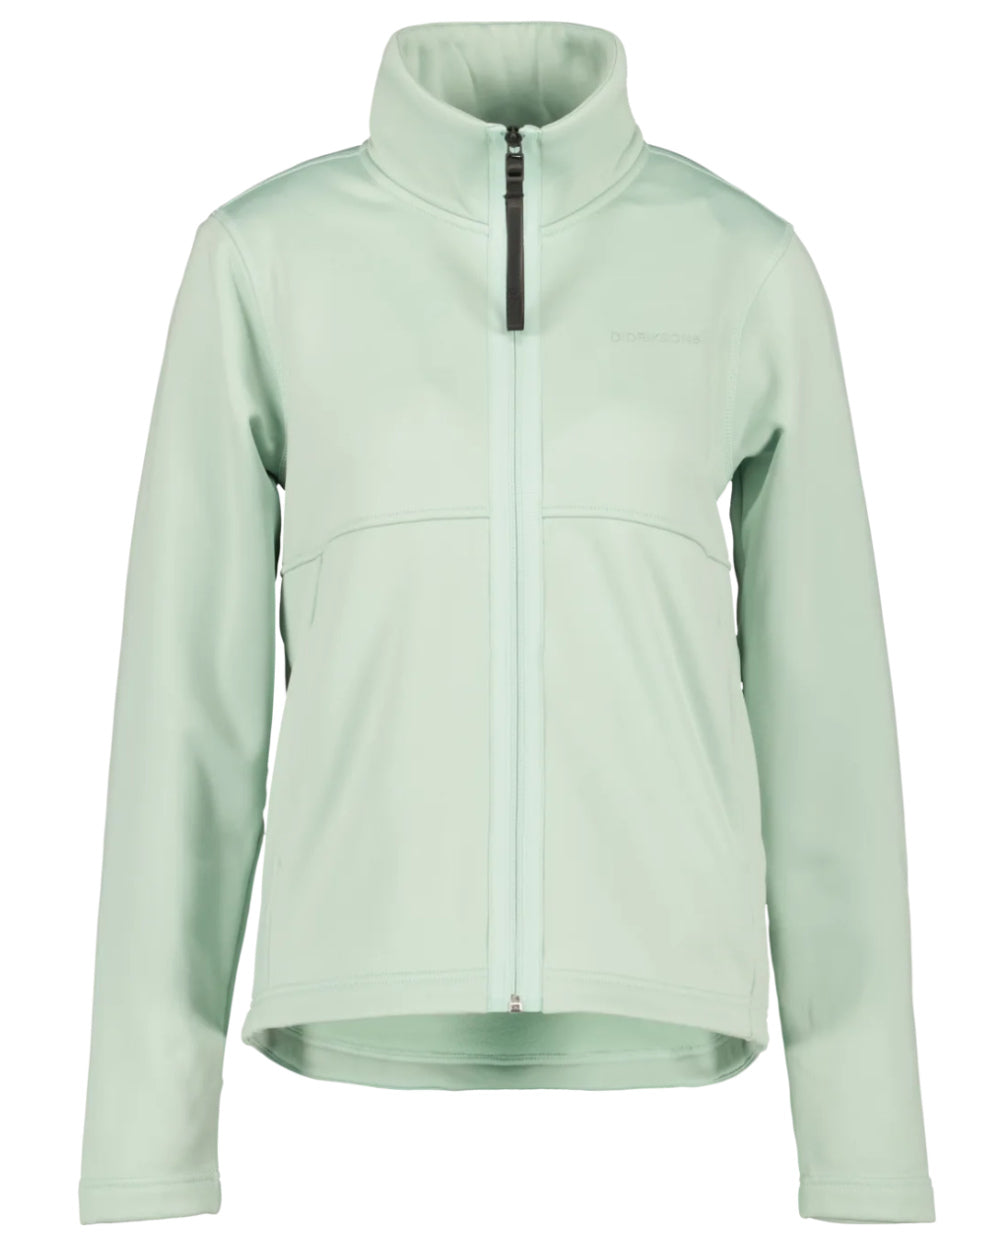 Pale Mint Coloured Didriksons Leah Womens Fullzip On A White Background 